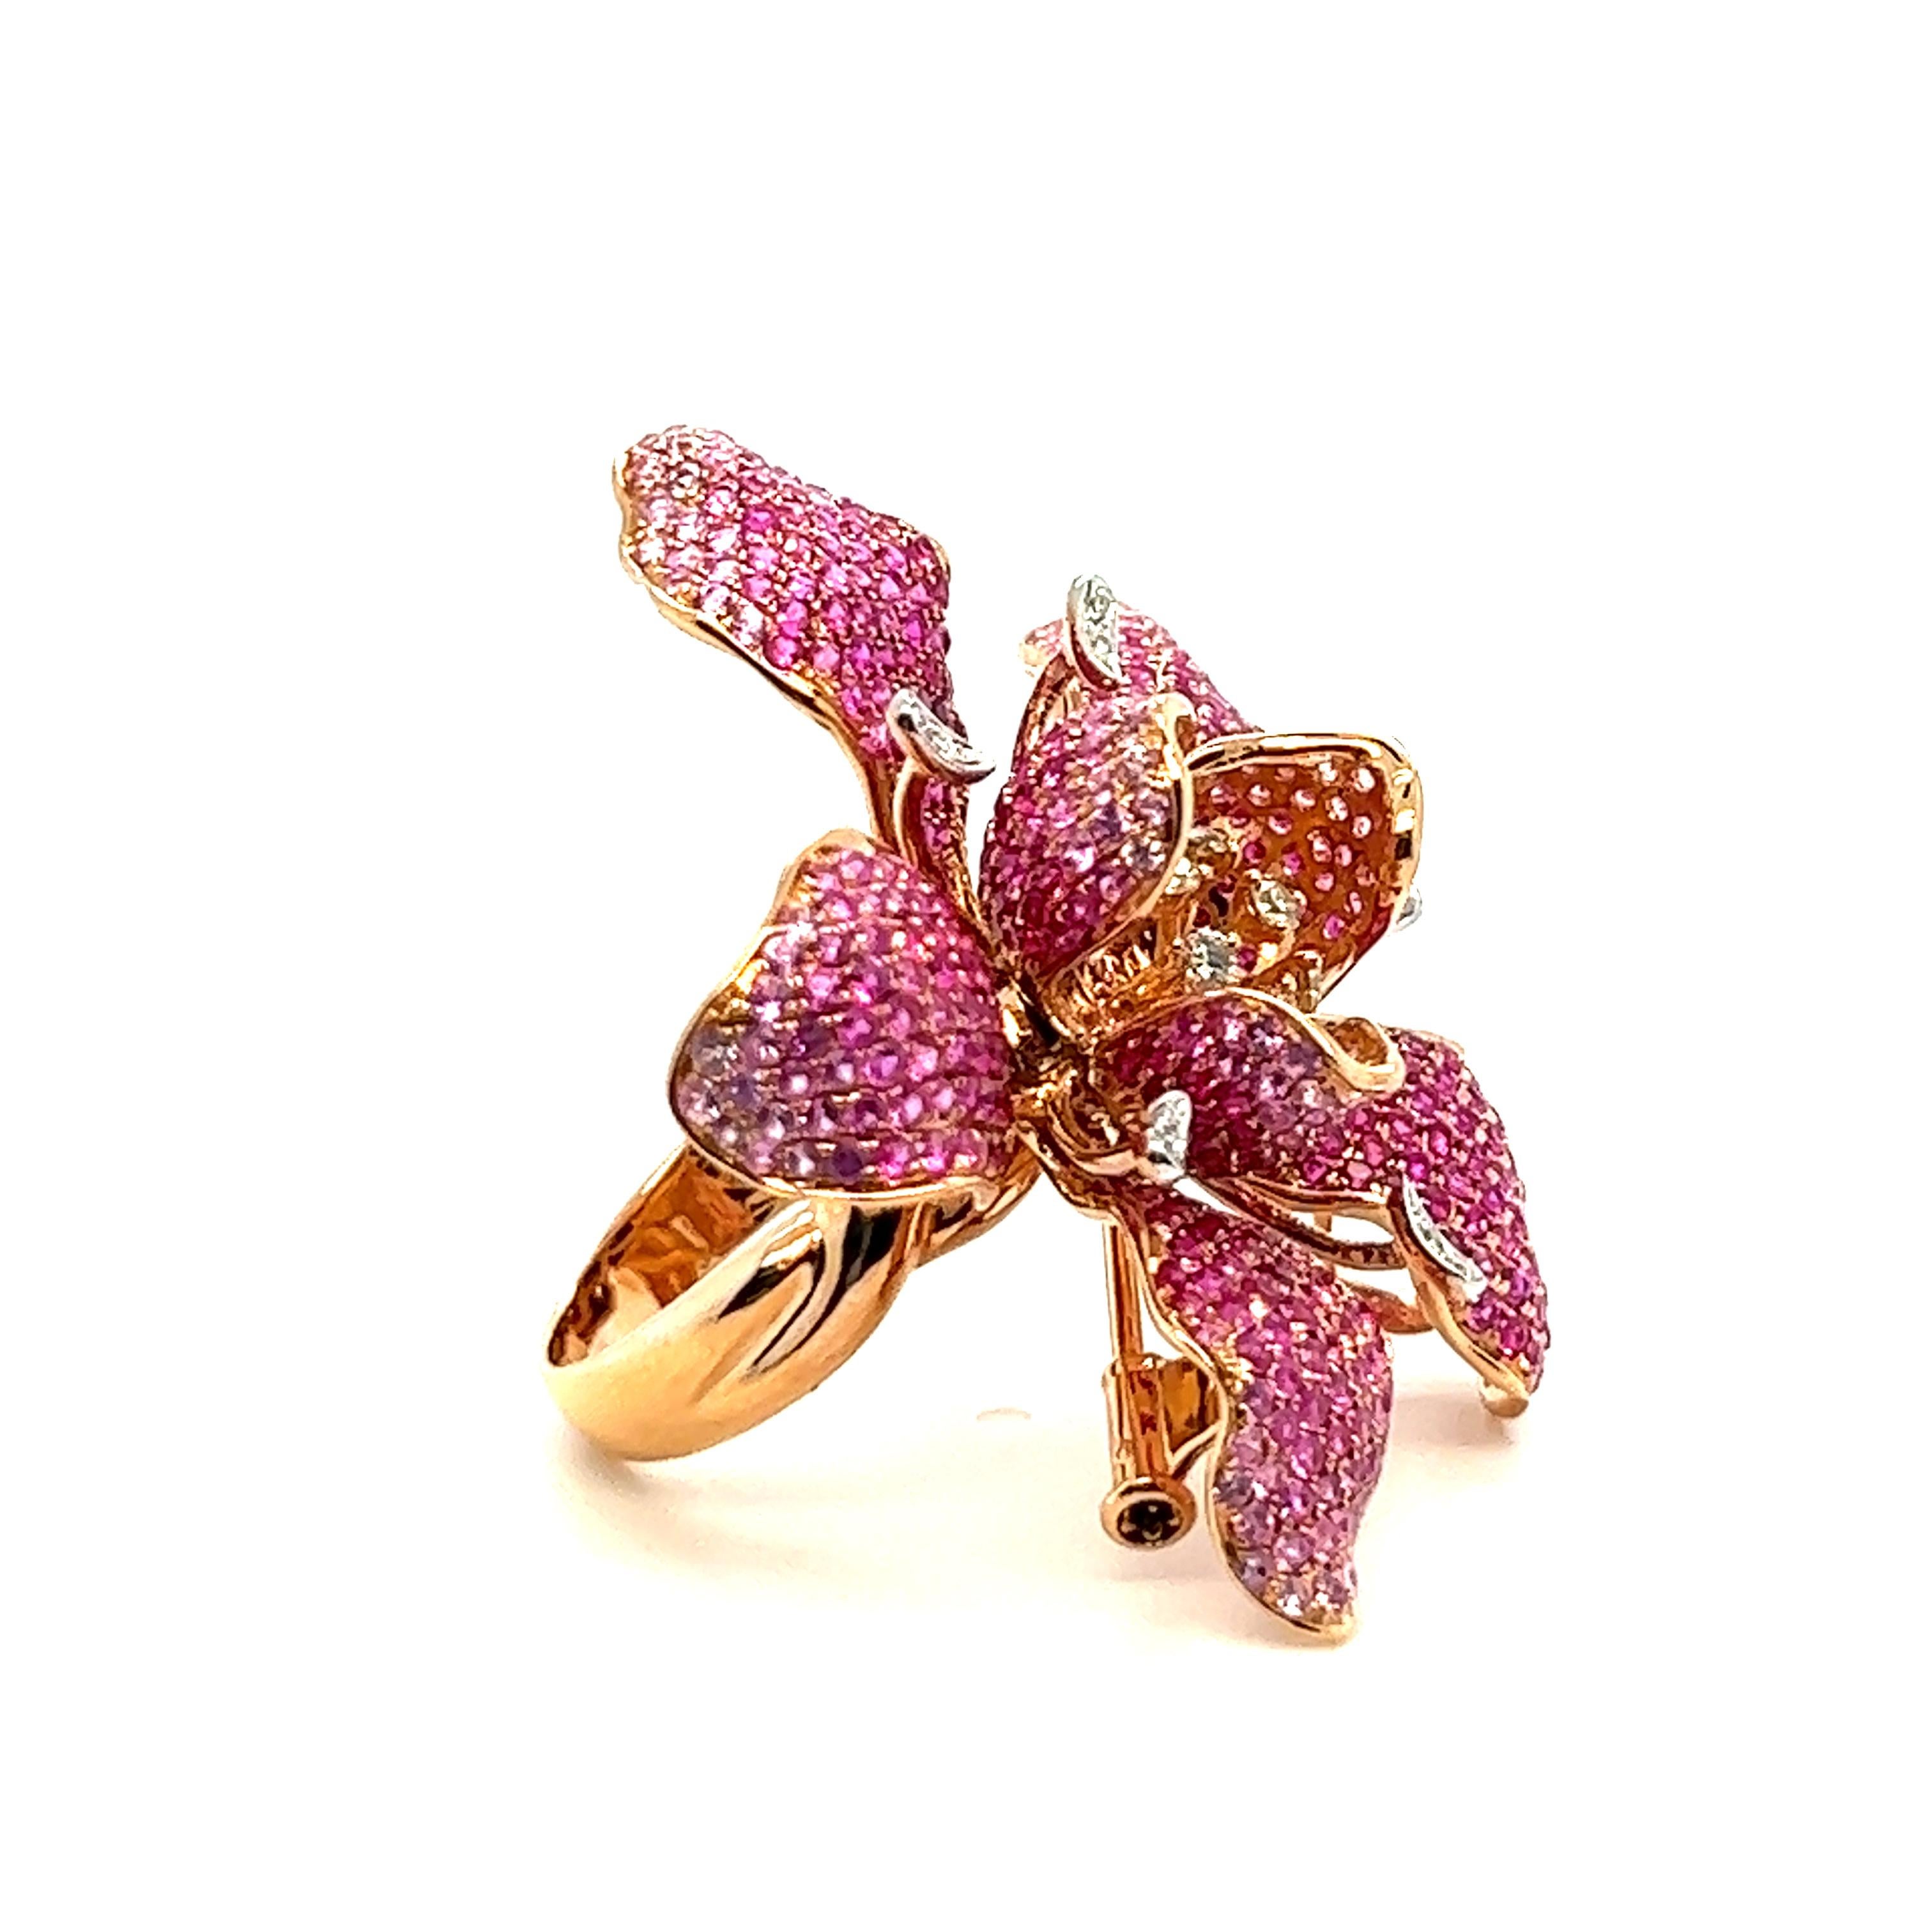 18K Gold Flower Collection Fuschia Gemstone Ring

66 Diamonds - 0.65CT 
28 Green Garnets - 0.60CT
295 Rubies - 6.95CT 
18K Rose Gold - 20.81GM

Unique handicrafts and precious Fuschia gemstones make a delicate flower bloom on your finger. It seems